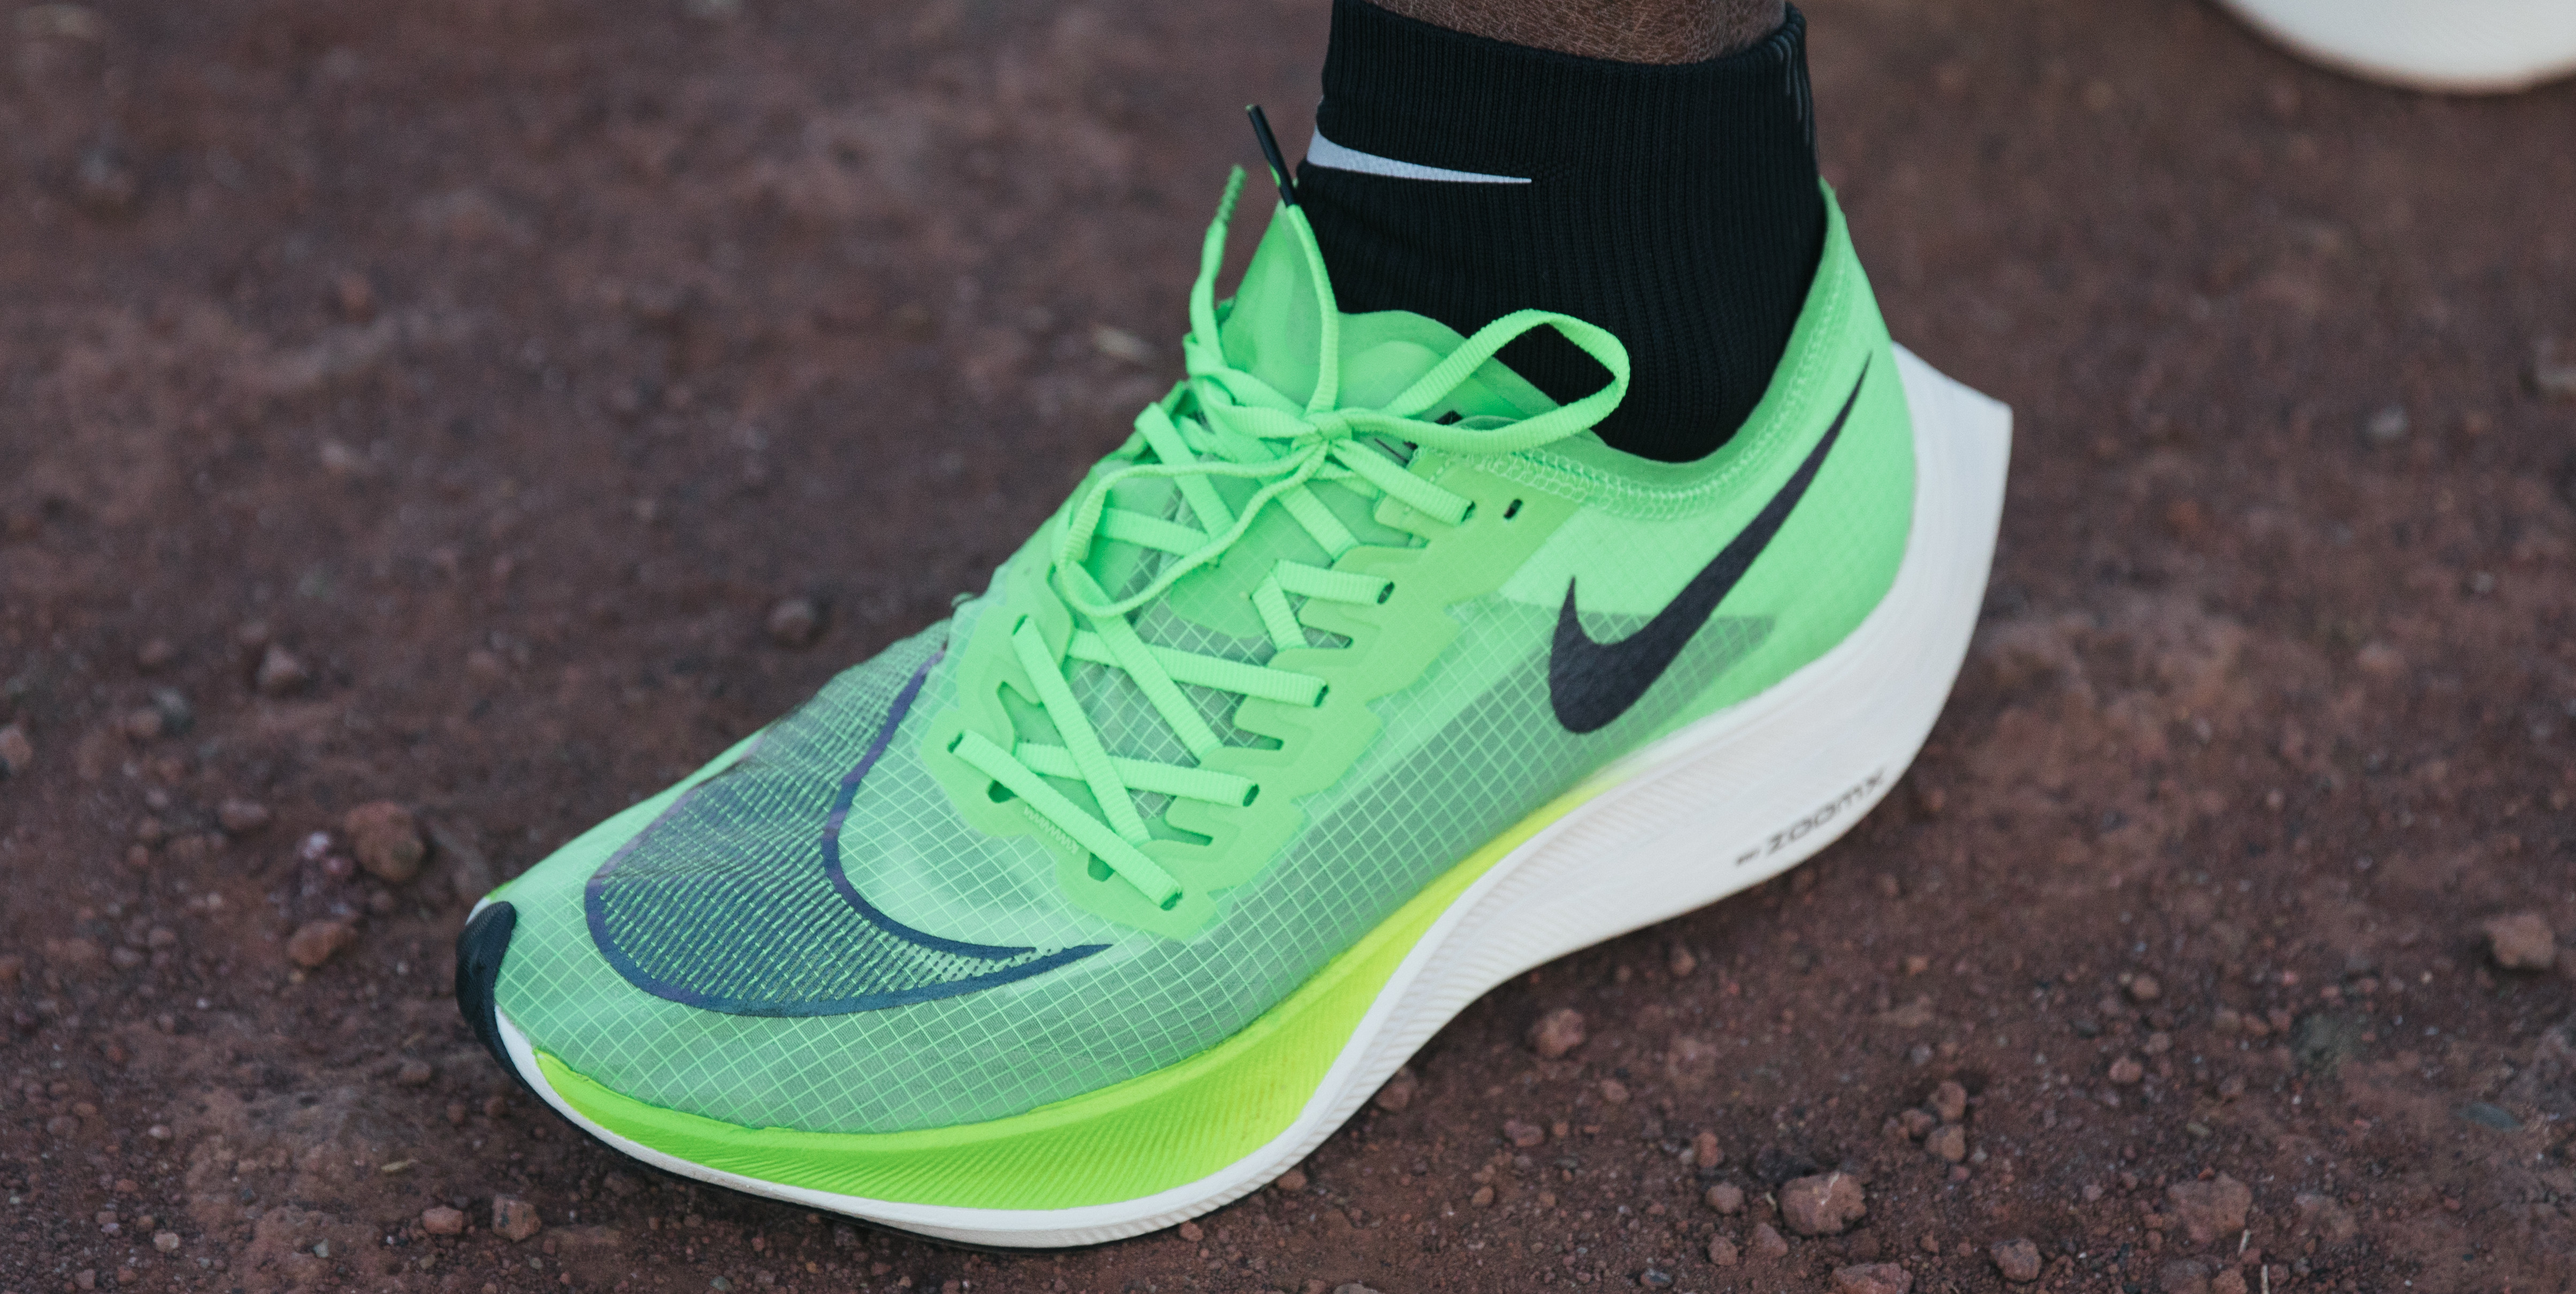 Nike ZoomX Vaporfly Next% Release Date 